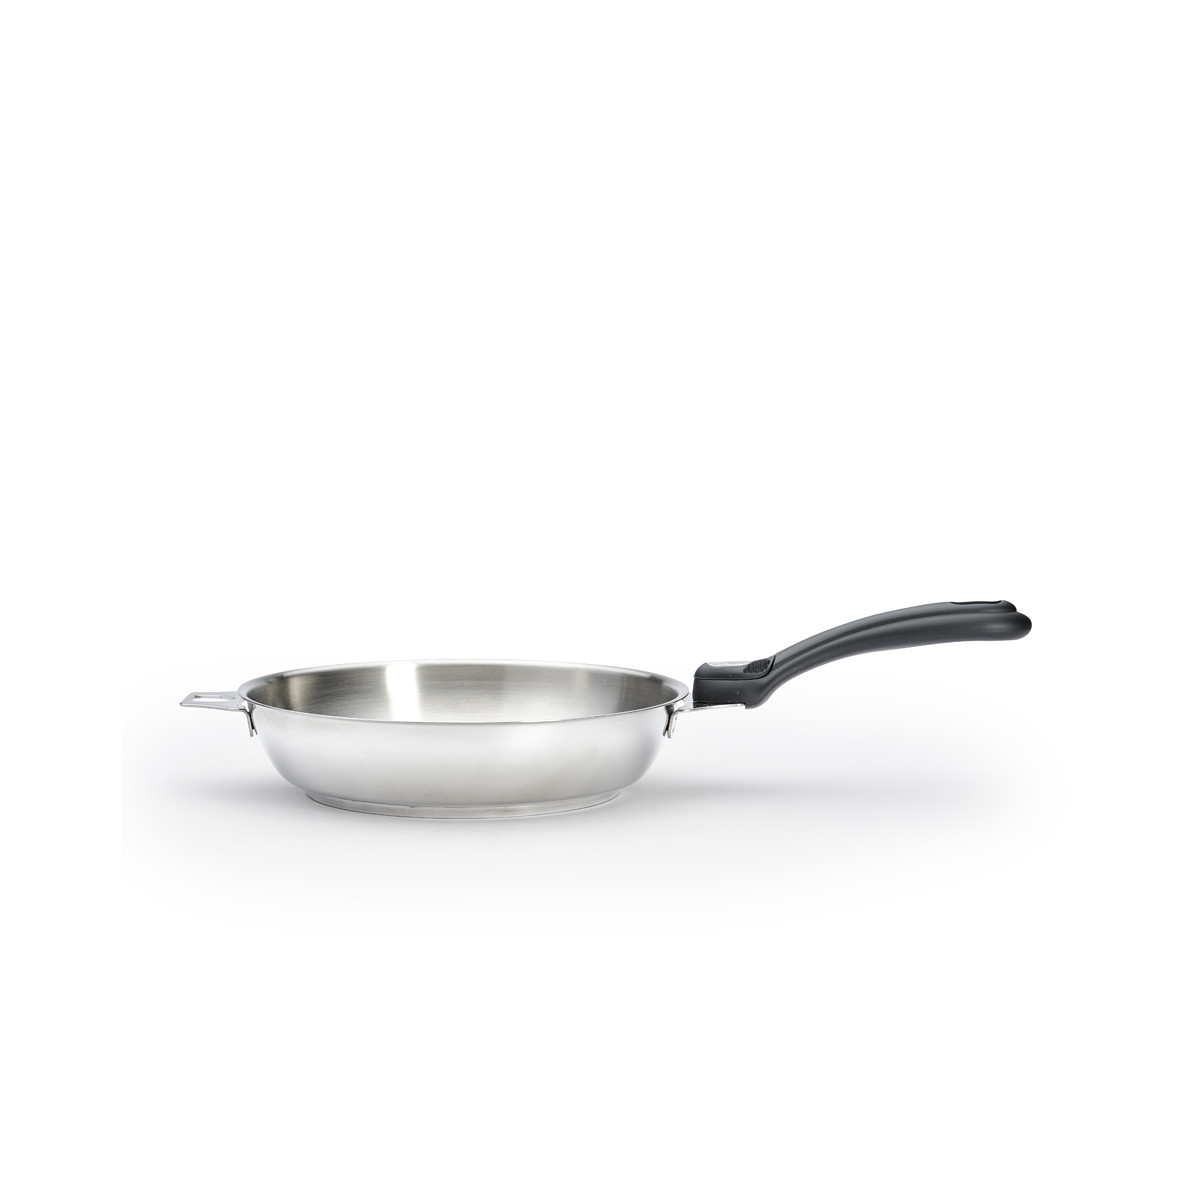 Stainless Steel Skillet - Round - Silver - 6.5 - 1 Count Box